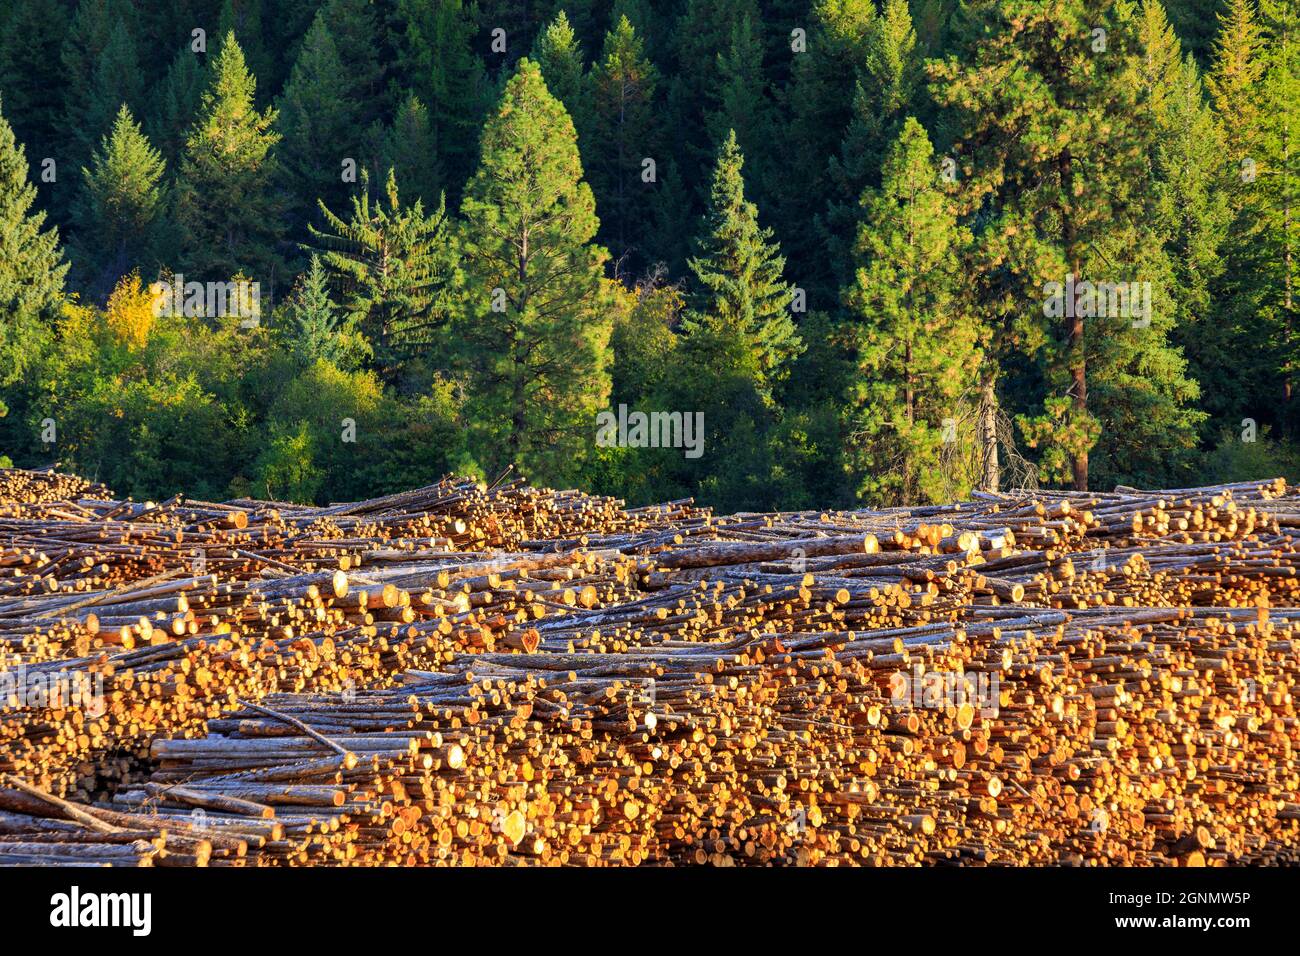 Felled cut wood timber logs in a pile at a sawmill in Midway, British Columbia, Canada. The lumber logging industry is a very important business for t Stock Photo